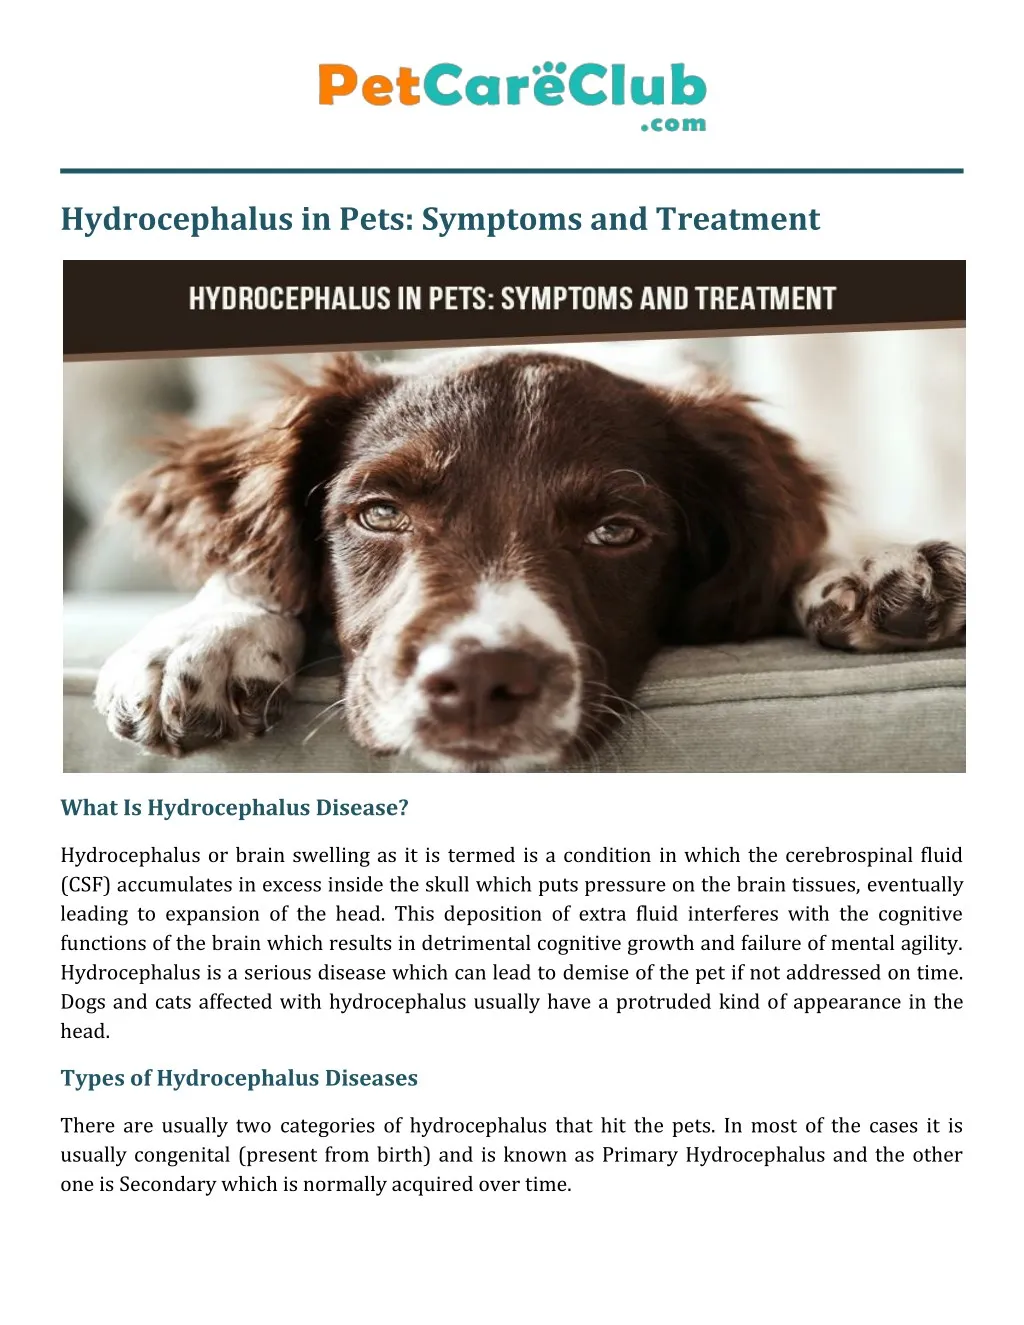 hydrocephalus in pets symptoms and treatment